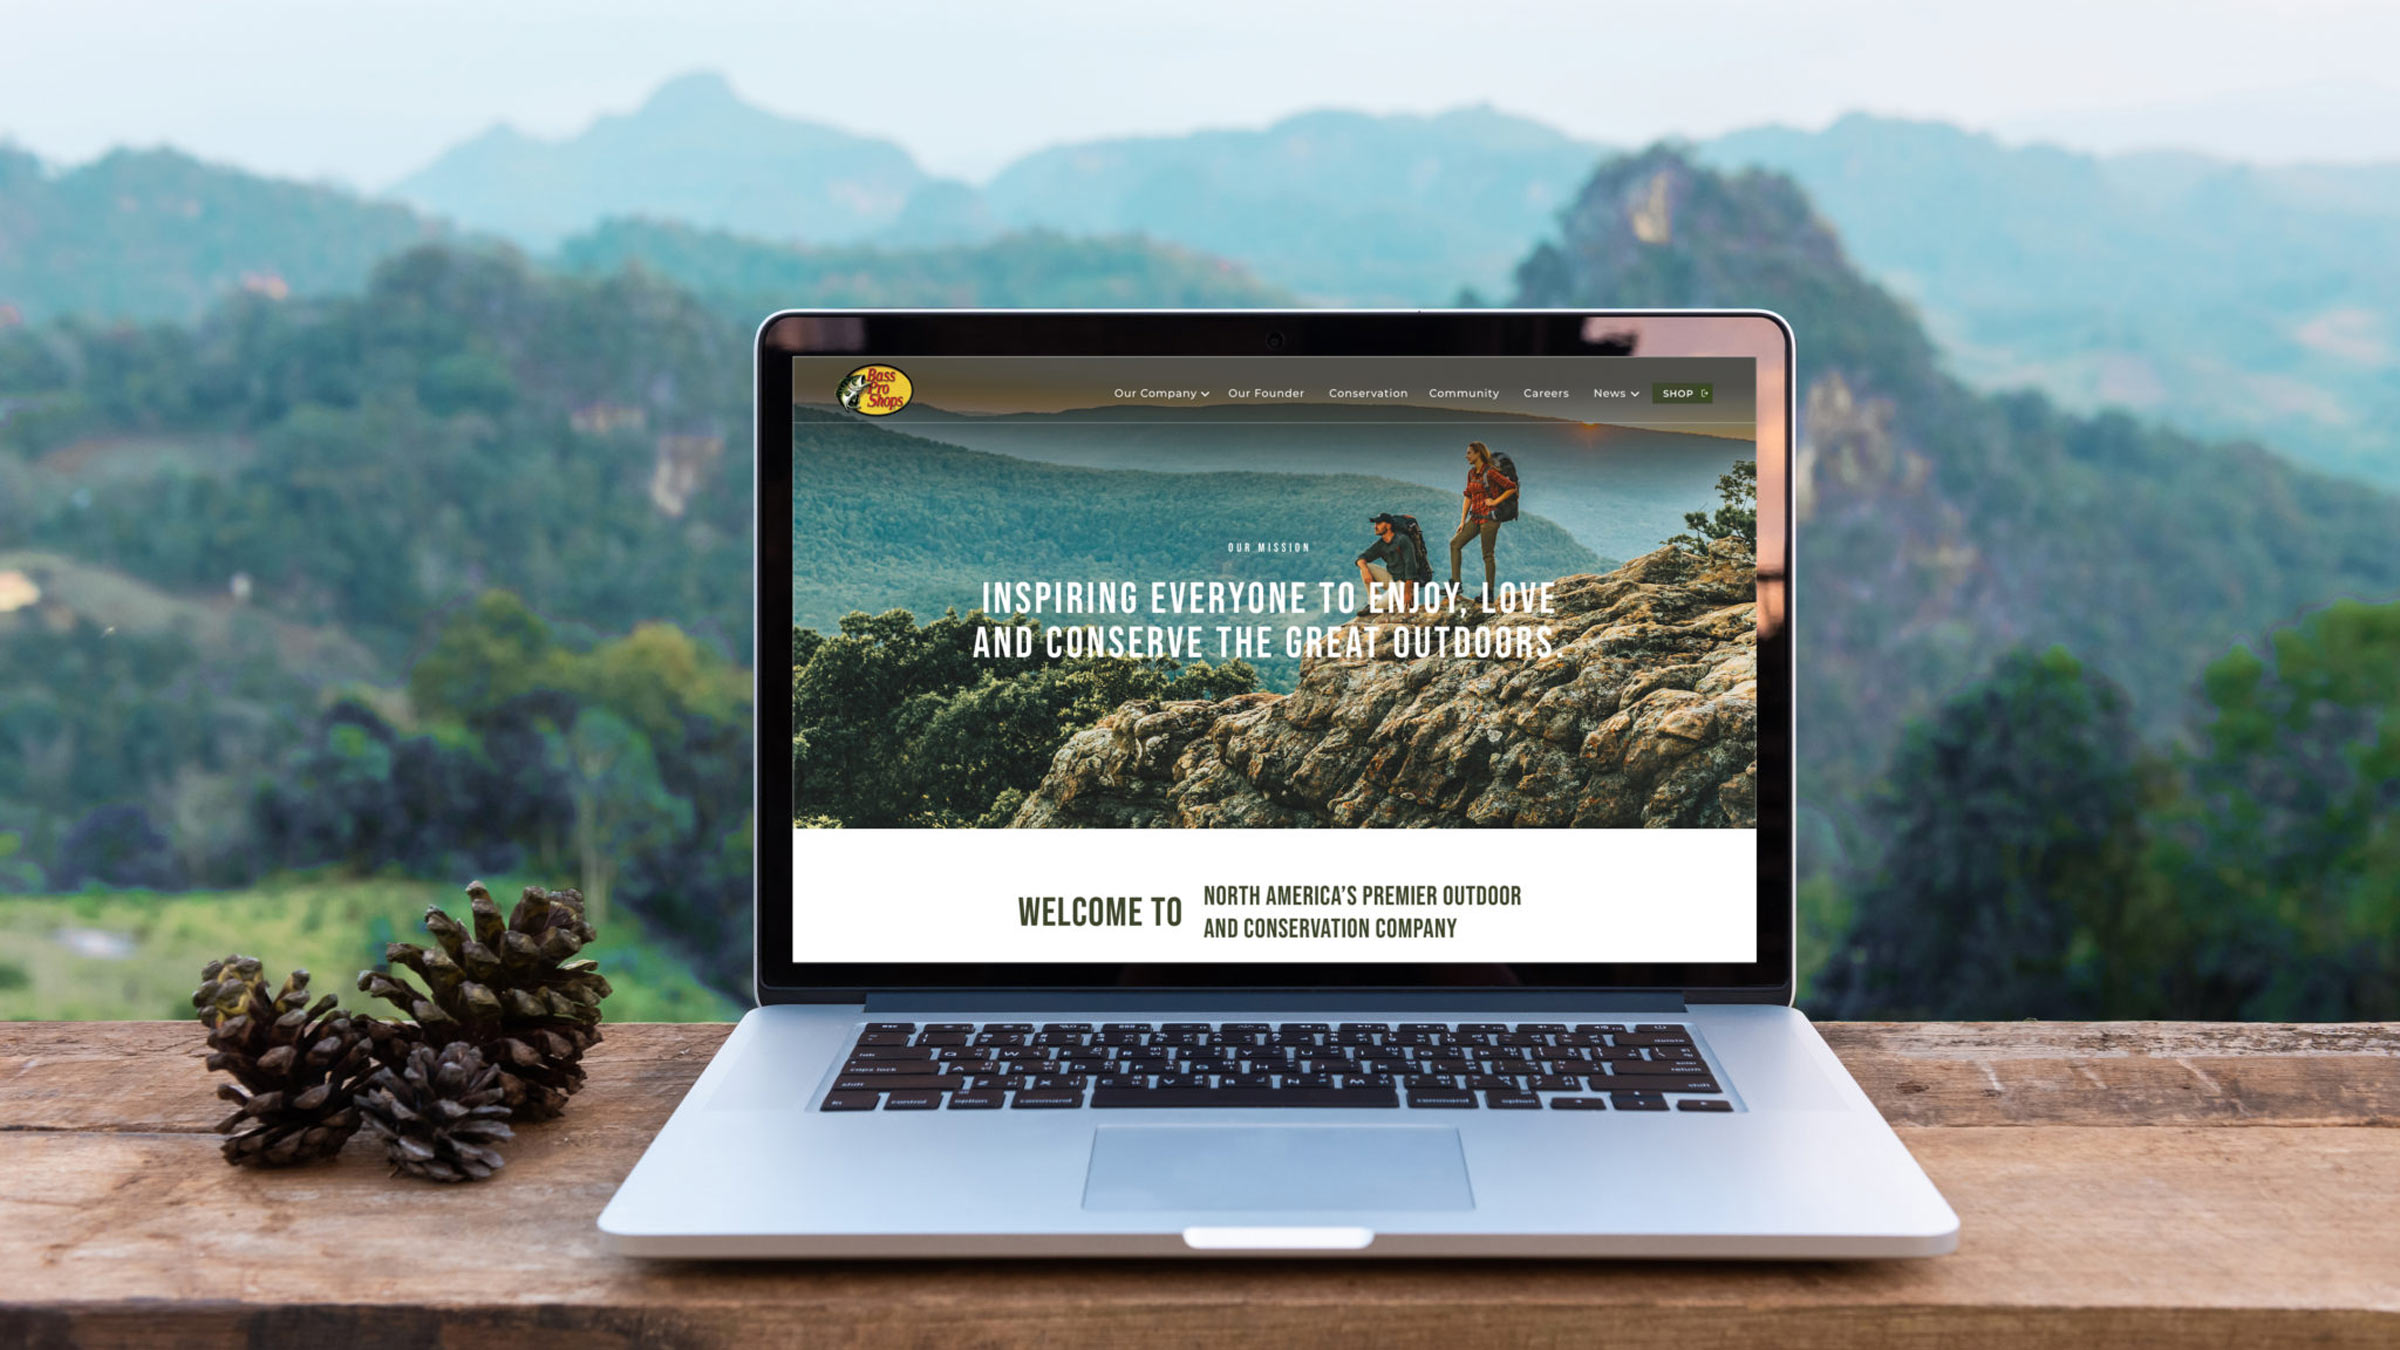 Bass Pro Shops brand page website design on a laptop in the mountains